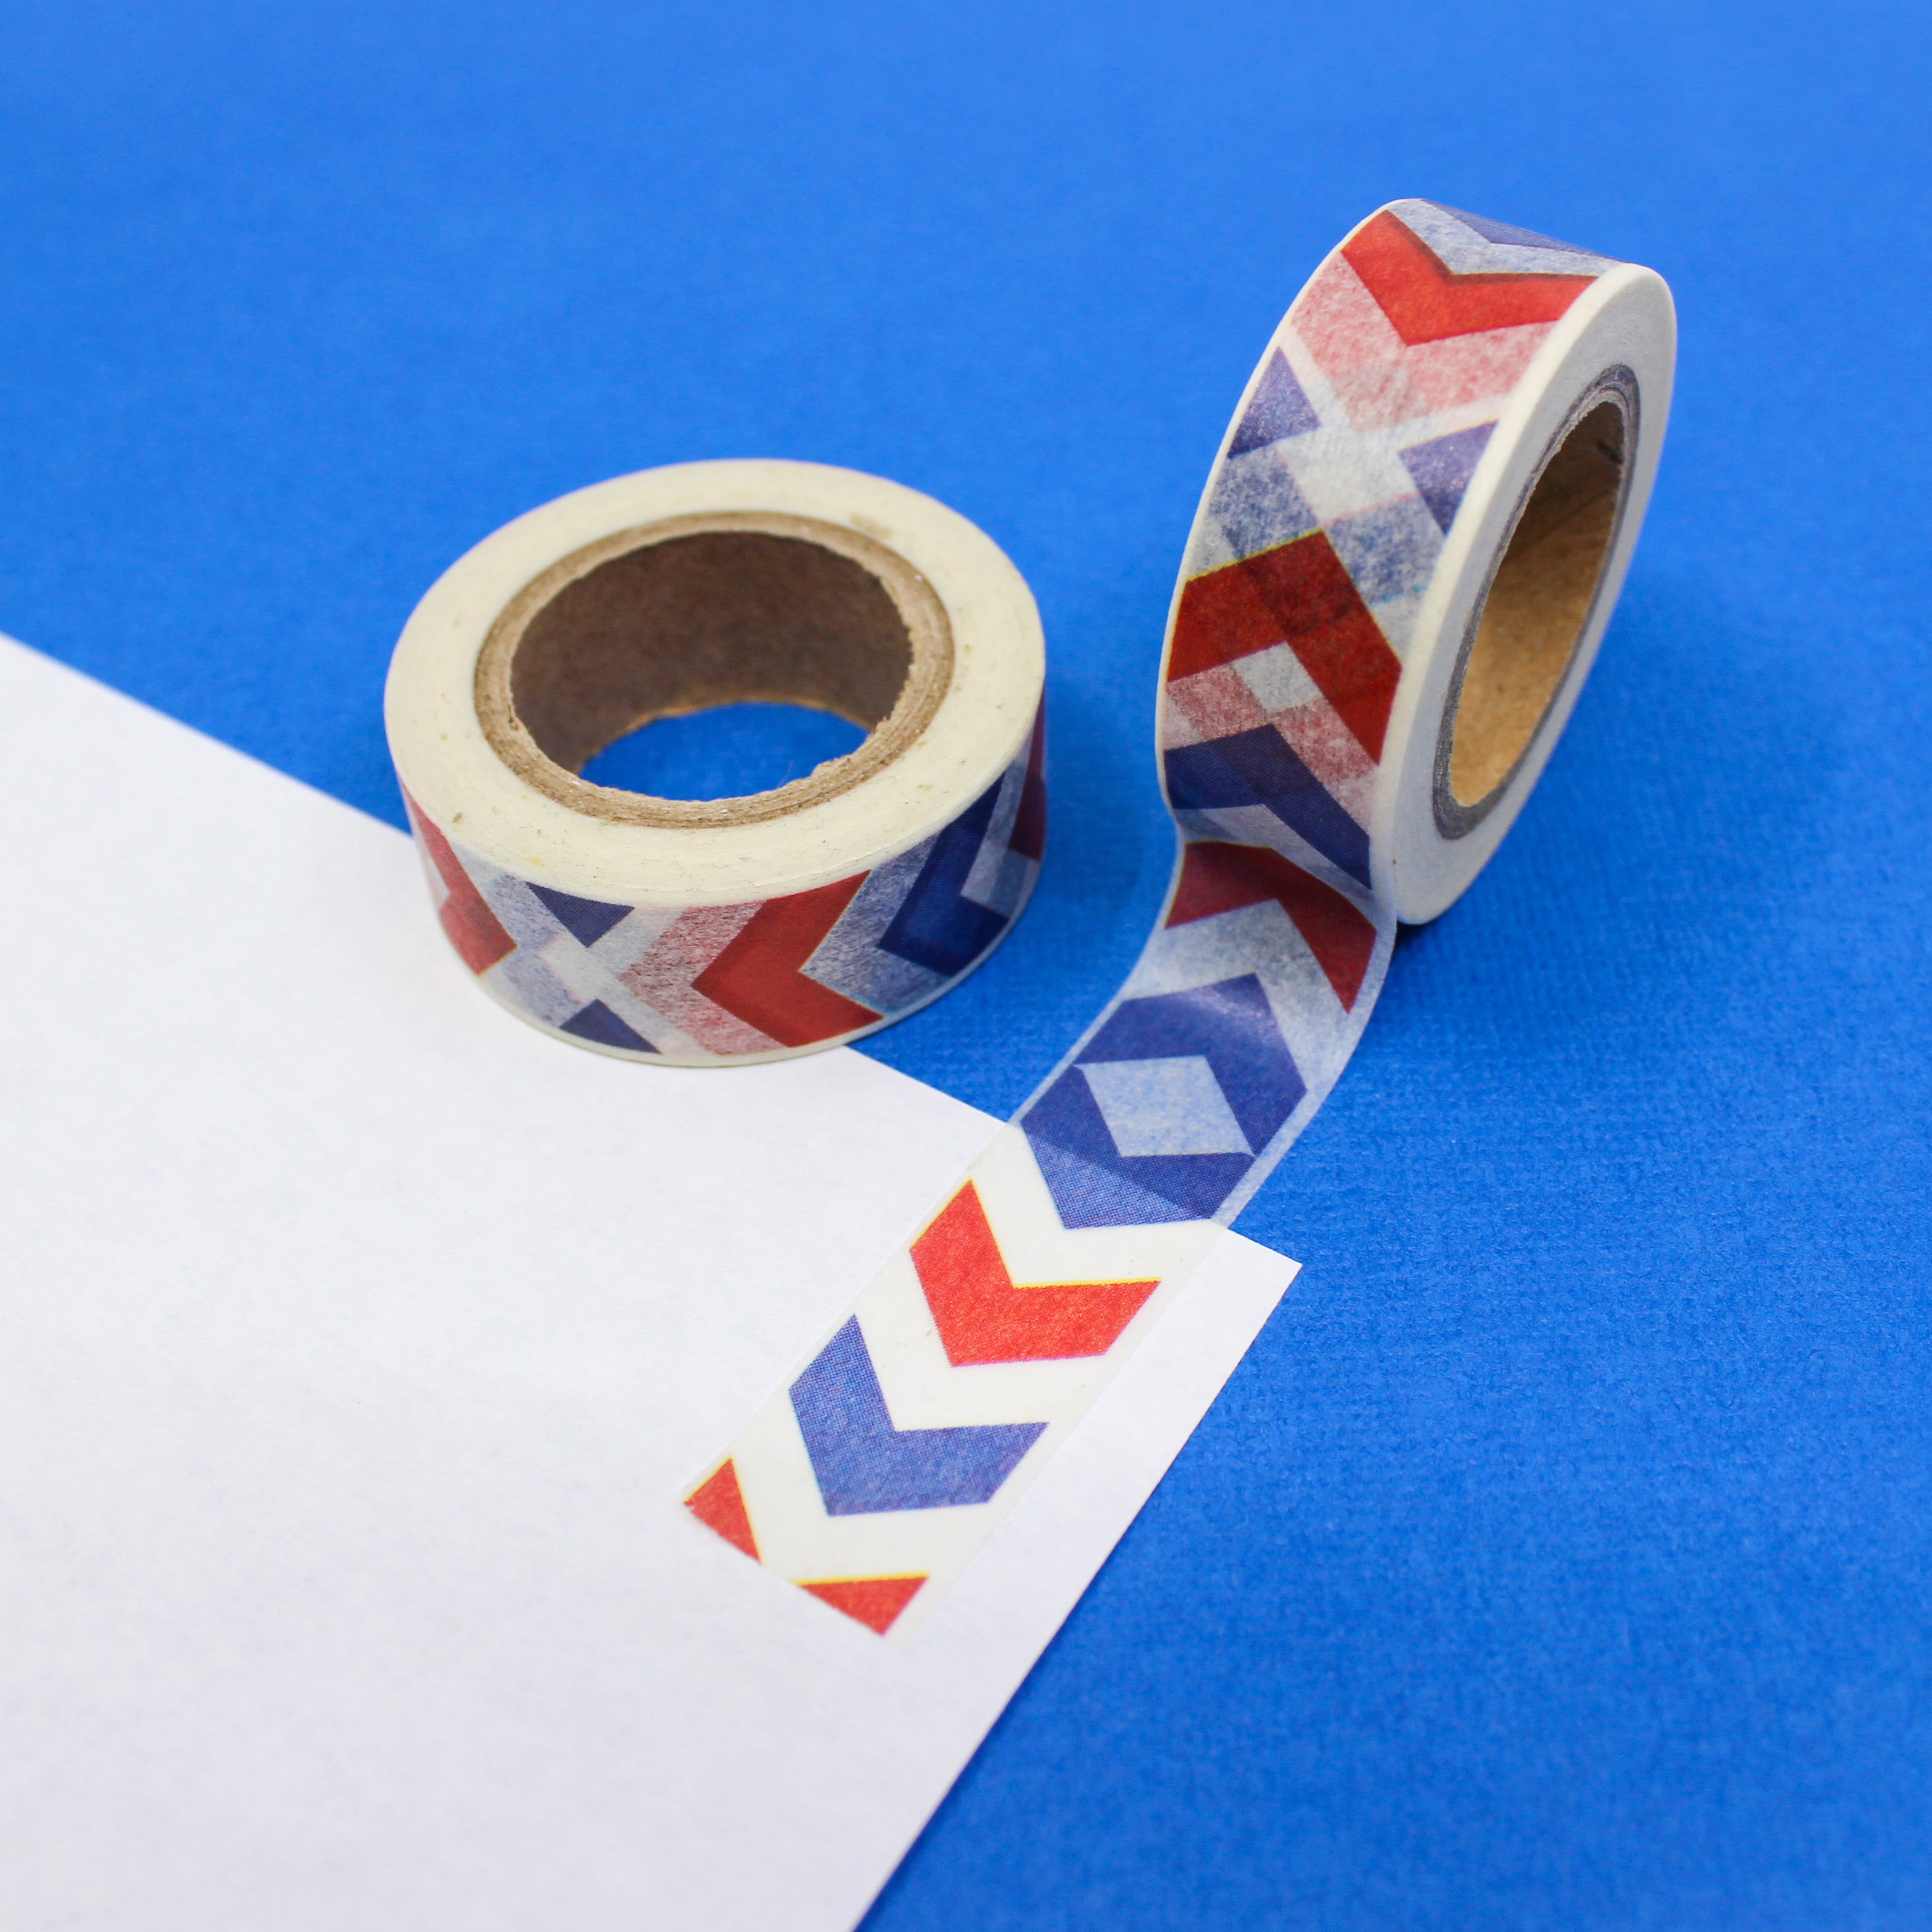 This is a red and blue large chevron pattern Washi Tape from BBB Supplies Craft Shop